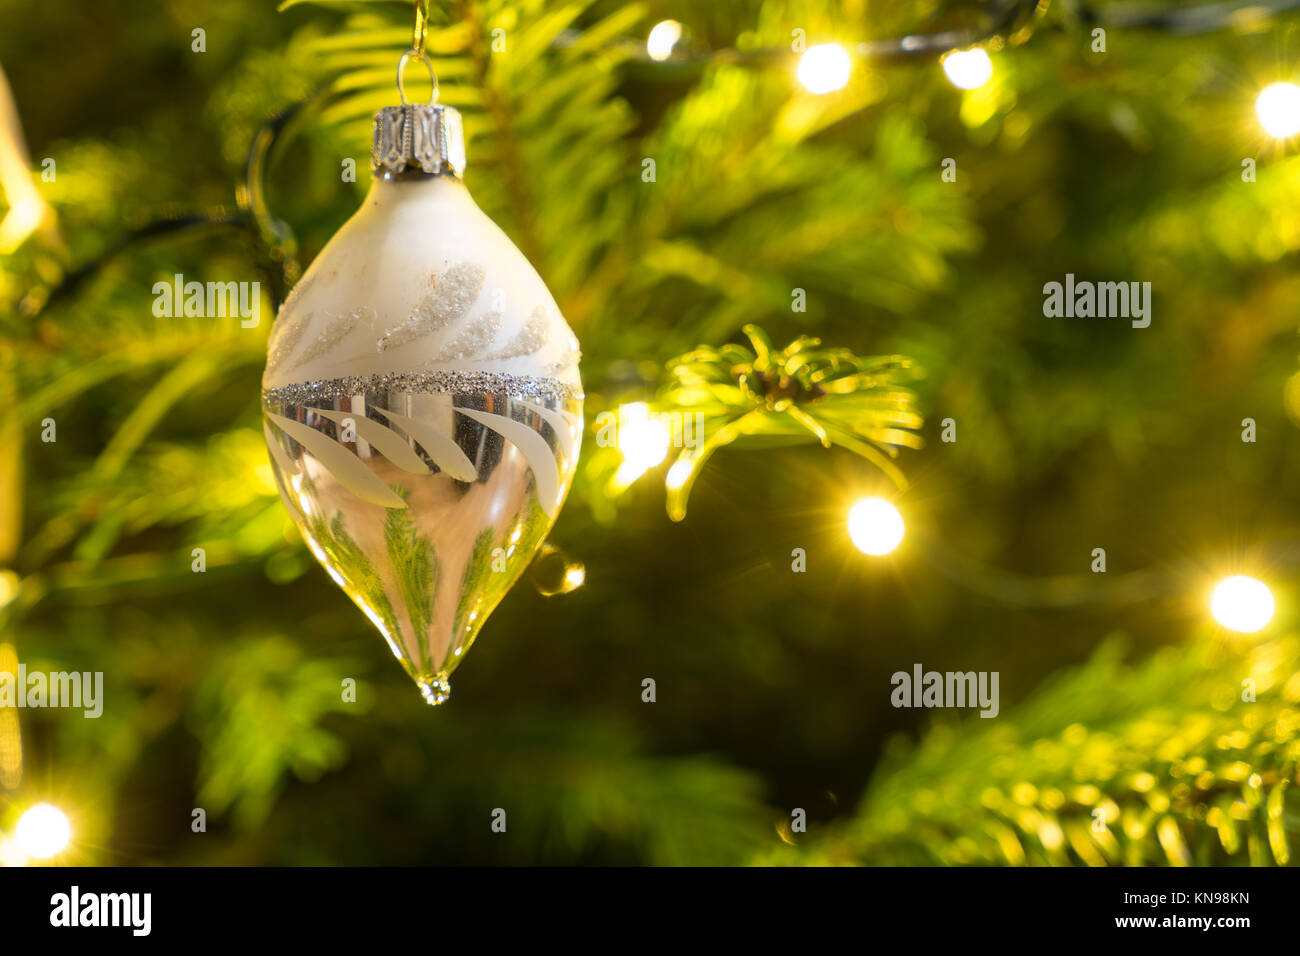 Christmas decoration white and silver cone hanging in a Nordman christmastree Stock Photo